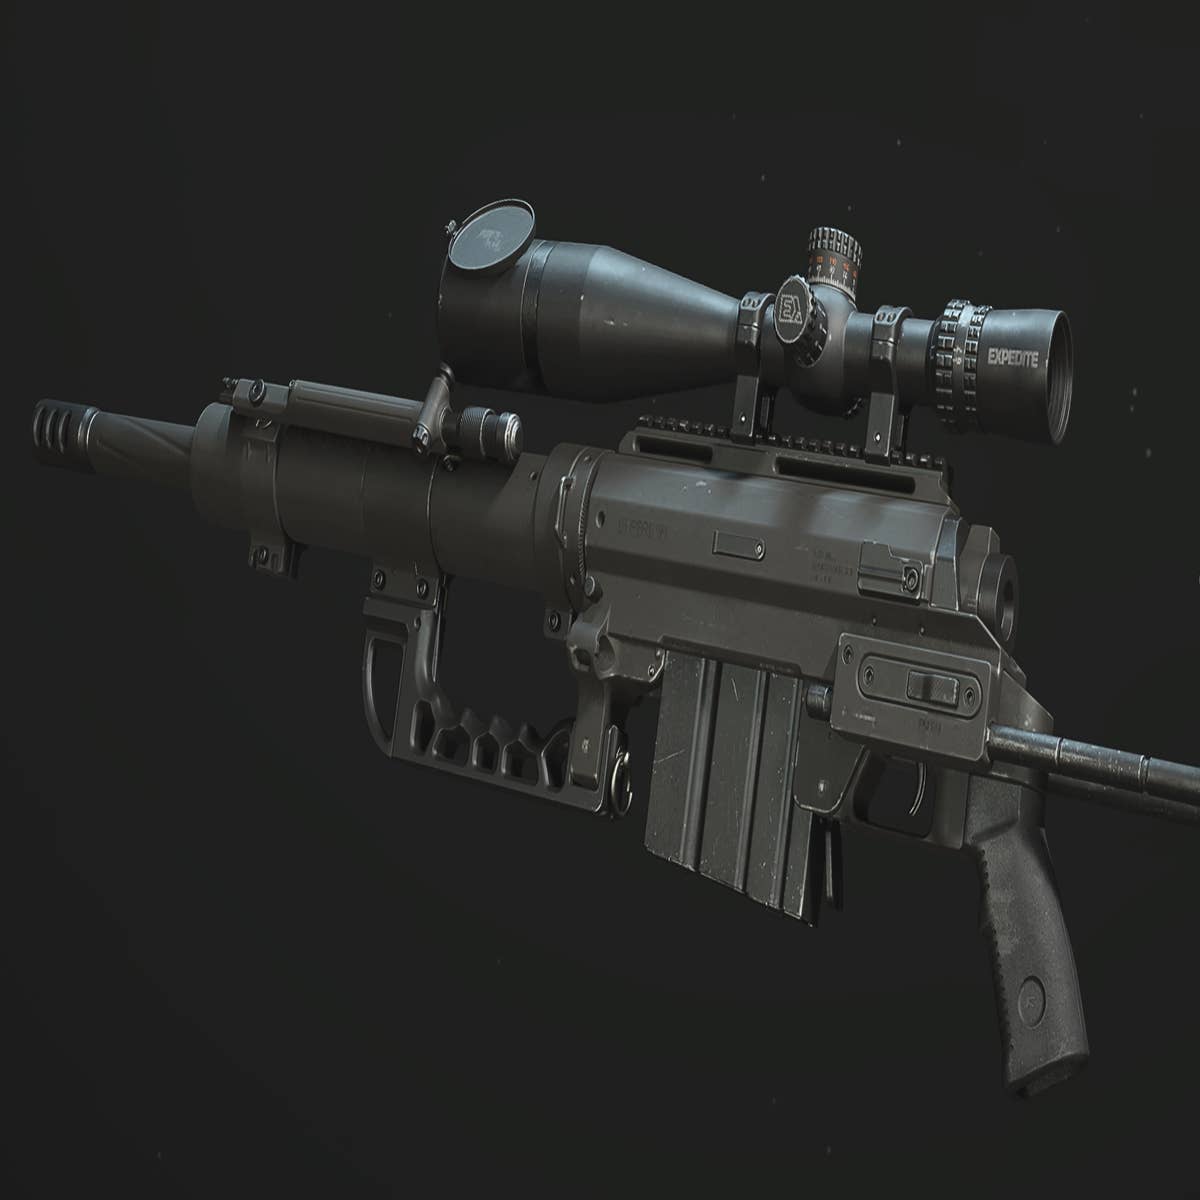 Best MW3 loadouts for the current meta